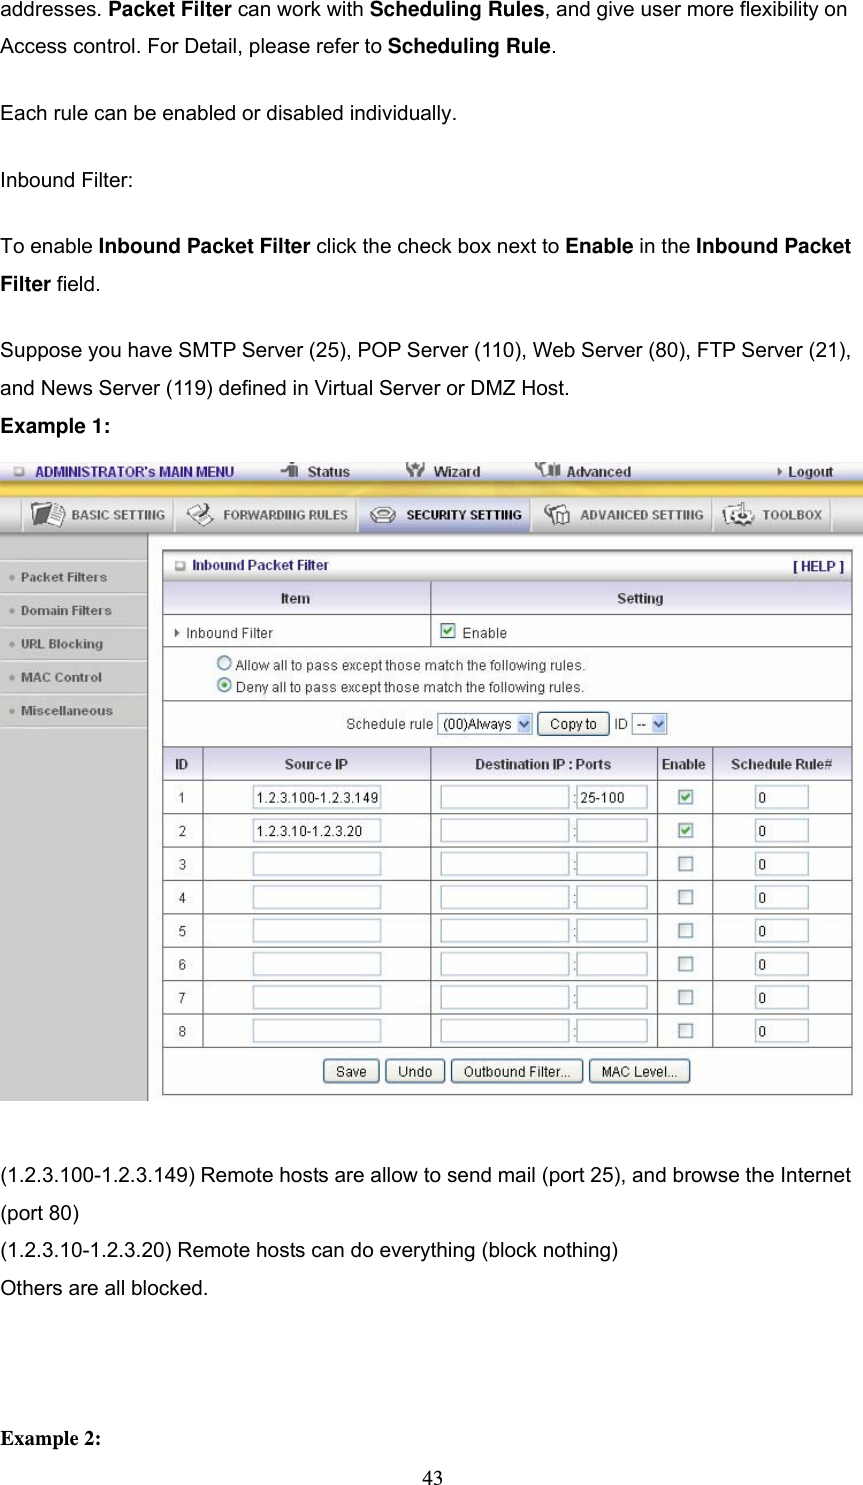  43addresses. Packet Filter can work with Scheduling Rules, and give user more flexibility on Access control. For Detail, please refer to Scheduling Rule. Each rule can be enabled or disabled individually. Inbound Filter:   To enable Inbound Packet Filter click the check box next to Enable in the Inbound Packet Filter field. Suppose you have SMTP Server (25), POP Server (110), Web Server (80), FTP Server (21), and News Server (119) defined in Virtual Server or DMZ Host. Example 1:   (1.2.3.100-1.2.3.149) Remote hosts are allow to send mail (port 25), and browse the Internet (port 80) (1.2.3.10-1.2.3.20) Remote hosts can do everything (block nothing)   Others are all blocked.    Example 2: 